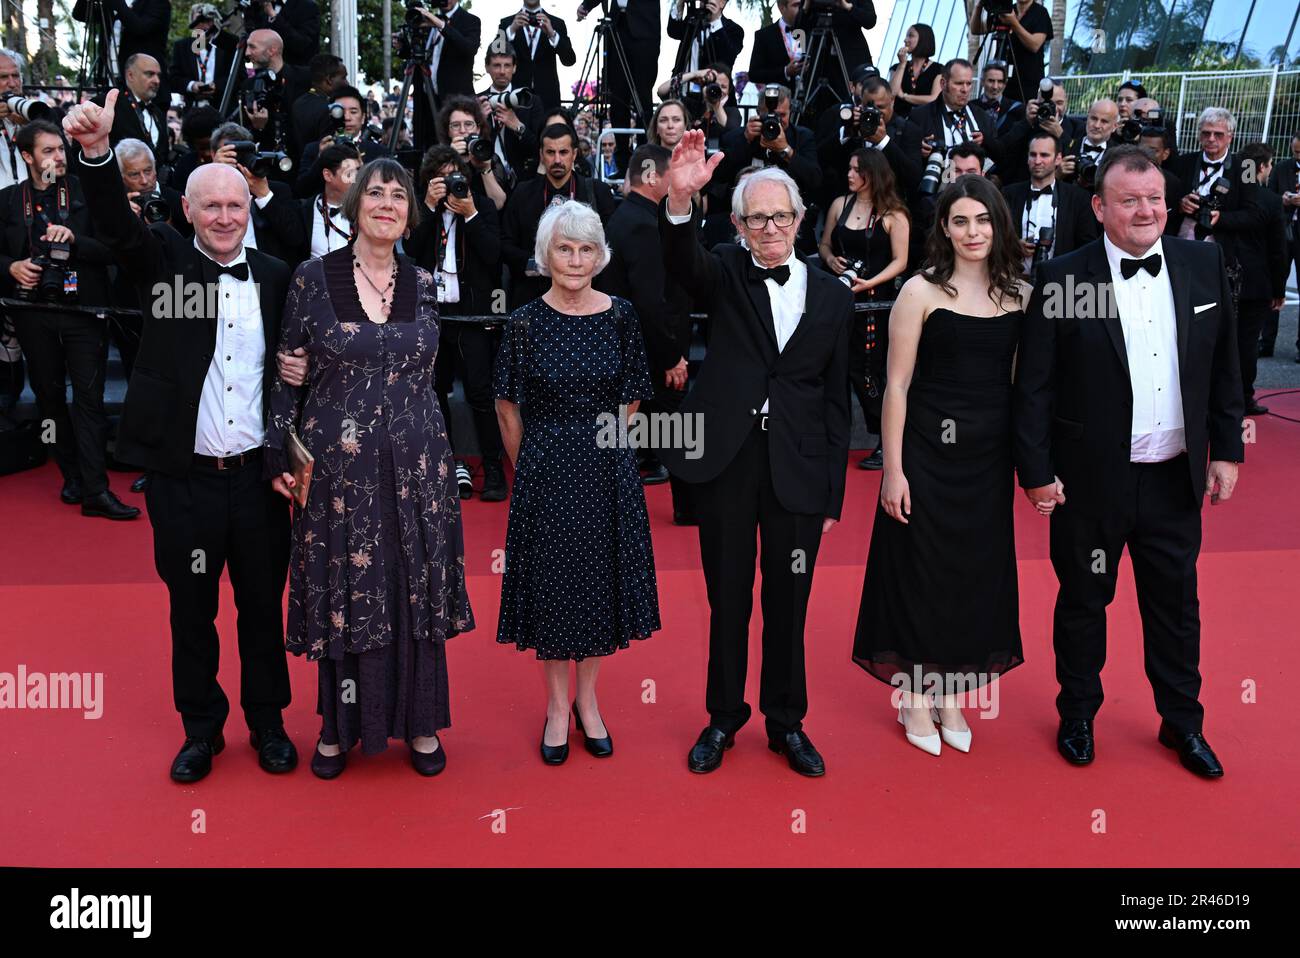 Cannes, France. 26th May, 2023. Cannes, France. May 26th, 2023. Paul Laverty, Rebecca O'Brien, Lesley Ashton, Director Ken Loach, Ebla Mari and Dave Turner arriving at the gala screening of The Old Oak, part of the 76th Cannes Film Festival, Palais des Festival. Credit: Doug Peters/Alamy Live News Stock Photo